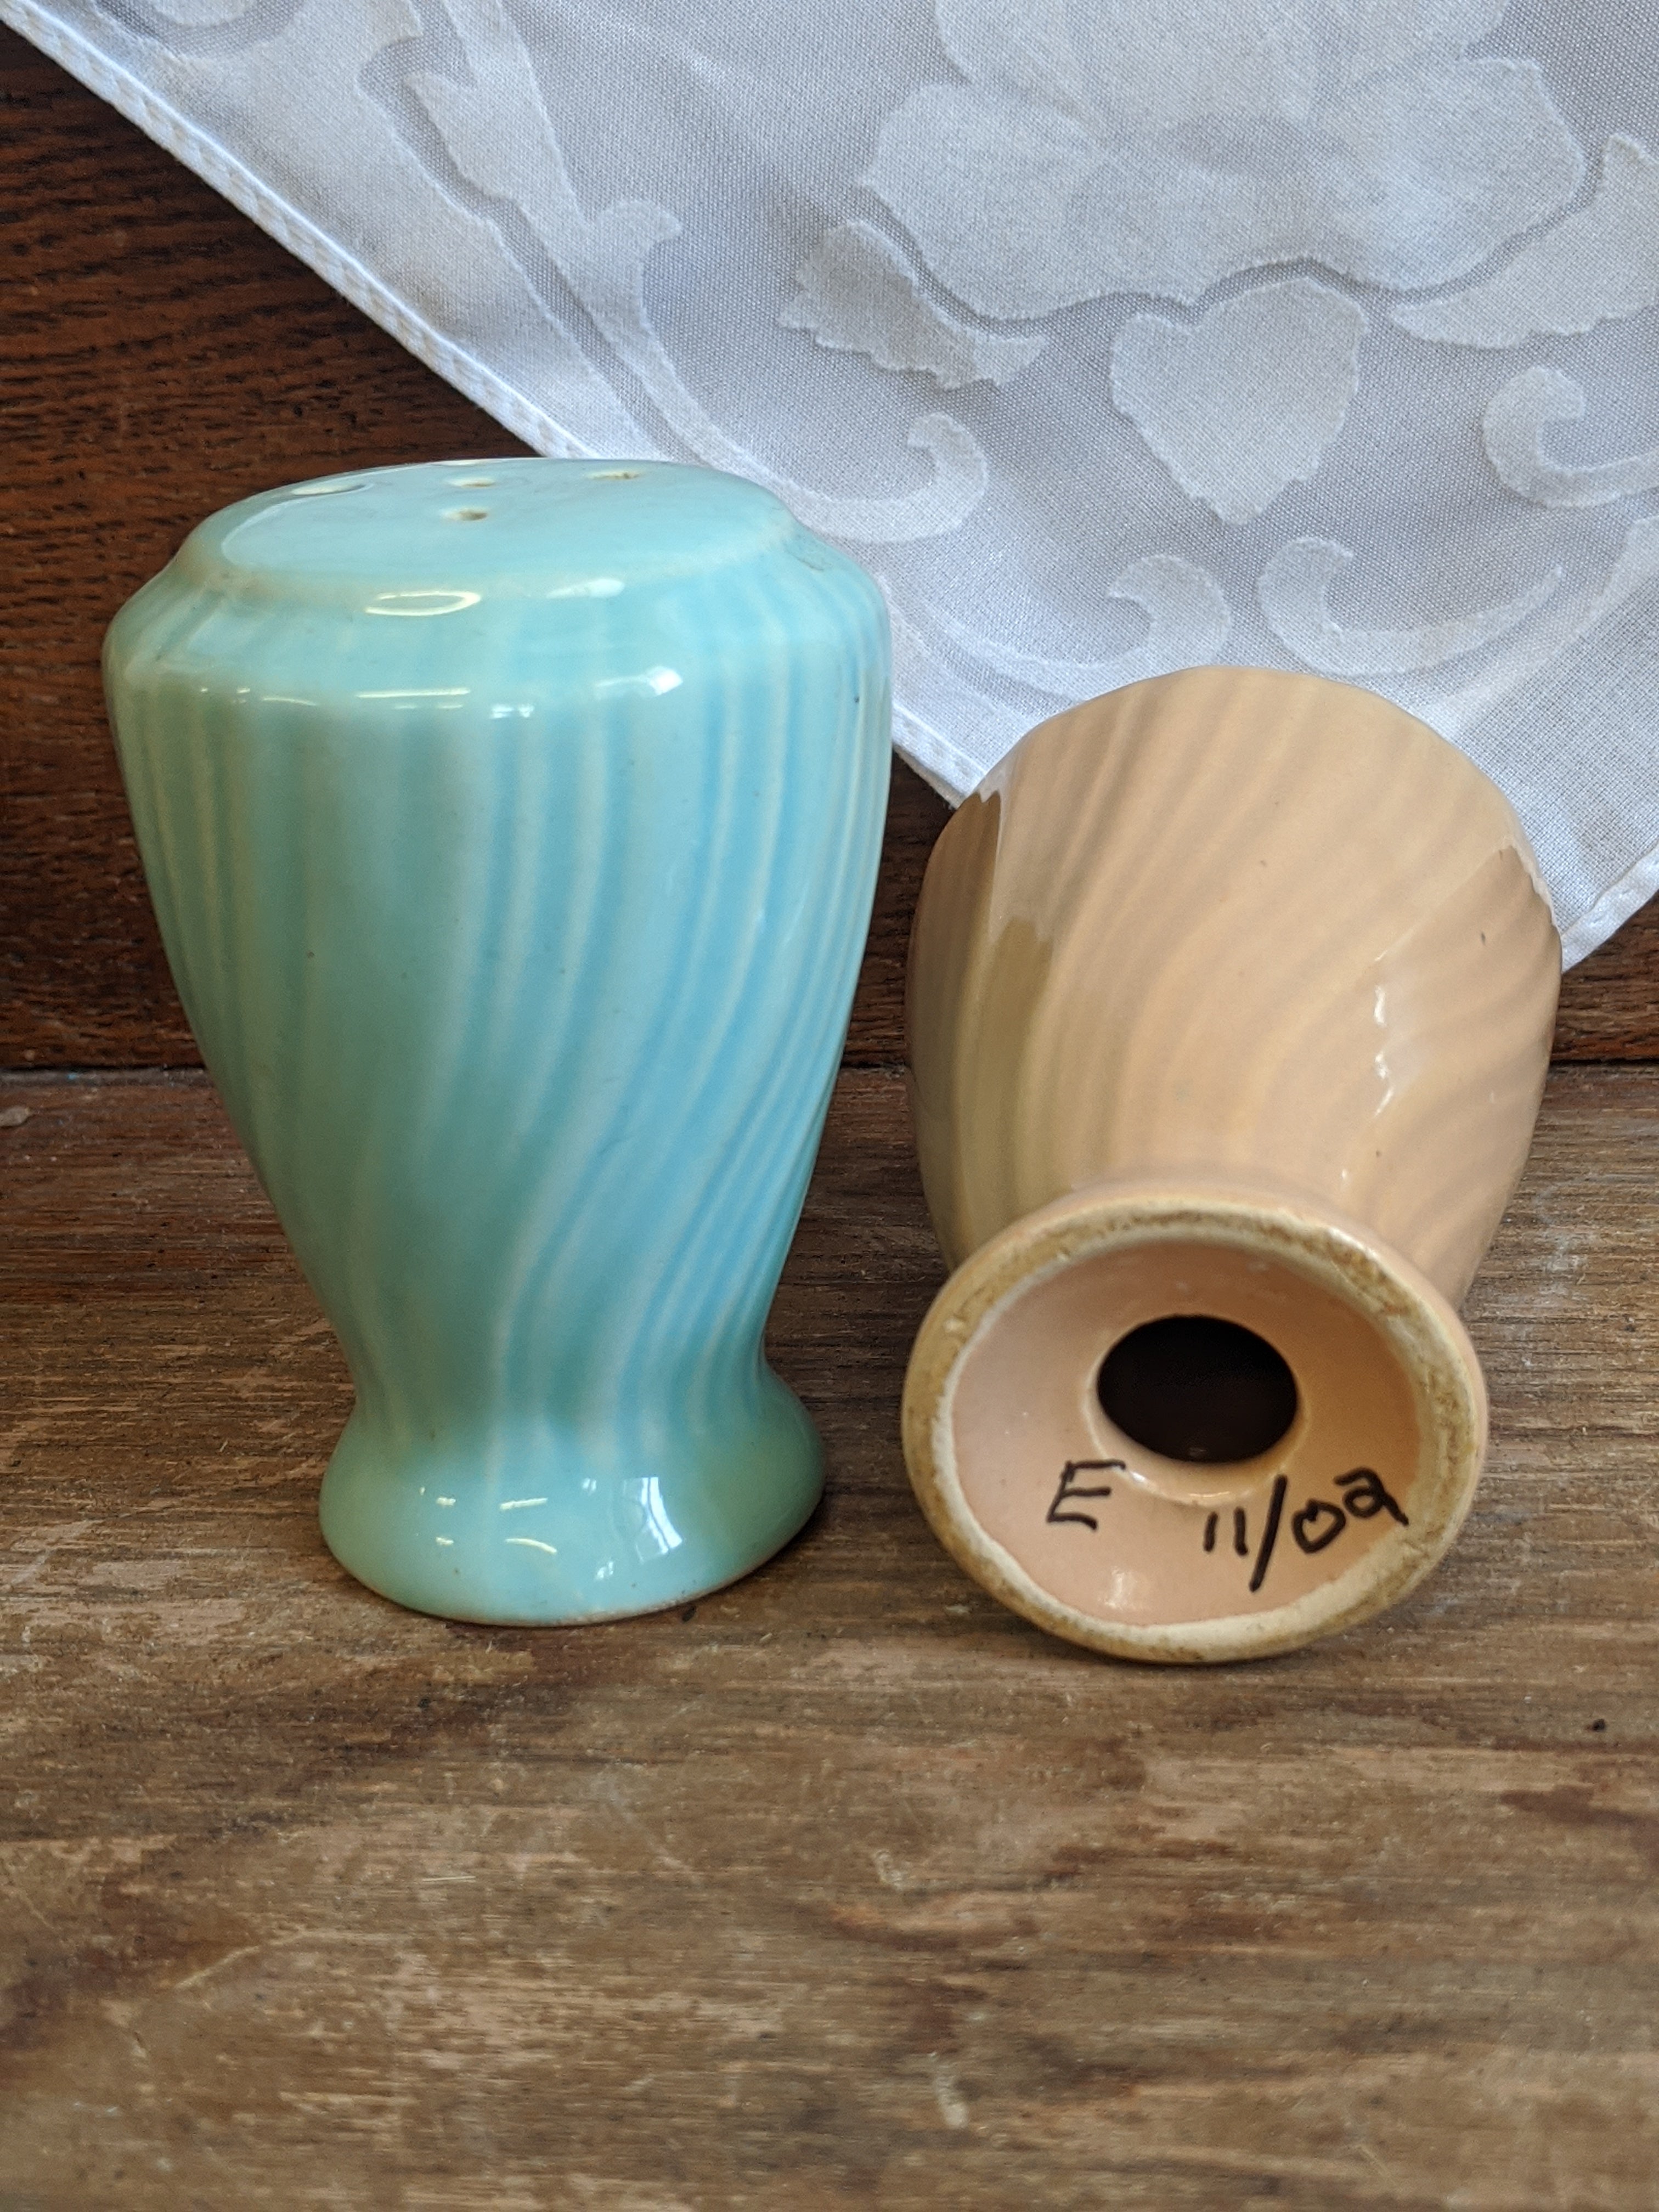 Vintage Blue and Pink mid-cen "twist cone" salt & pepper shakers